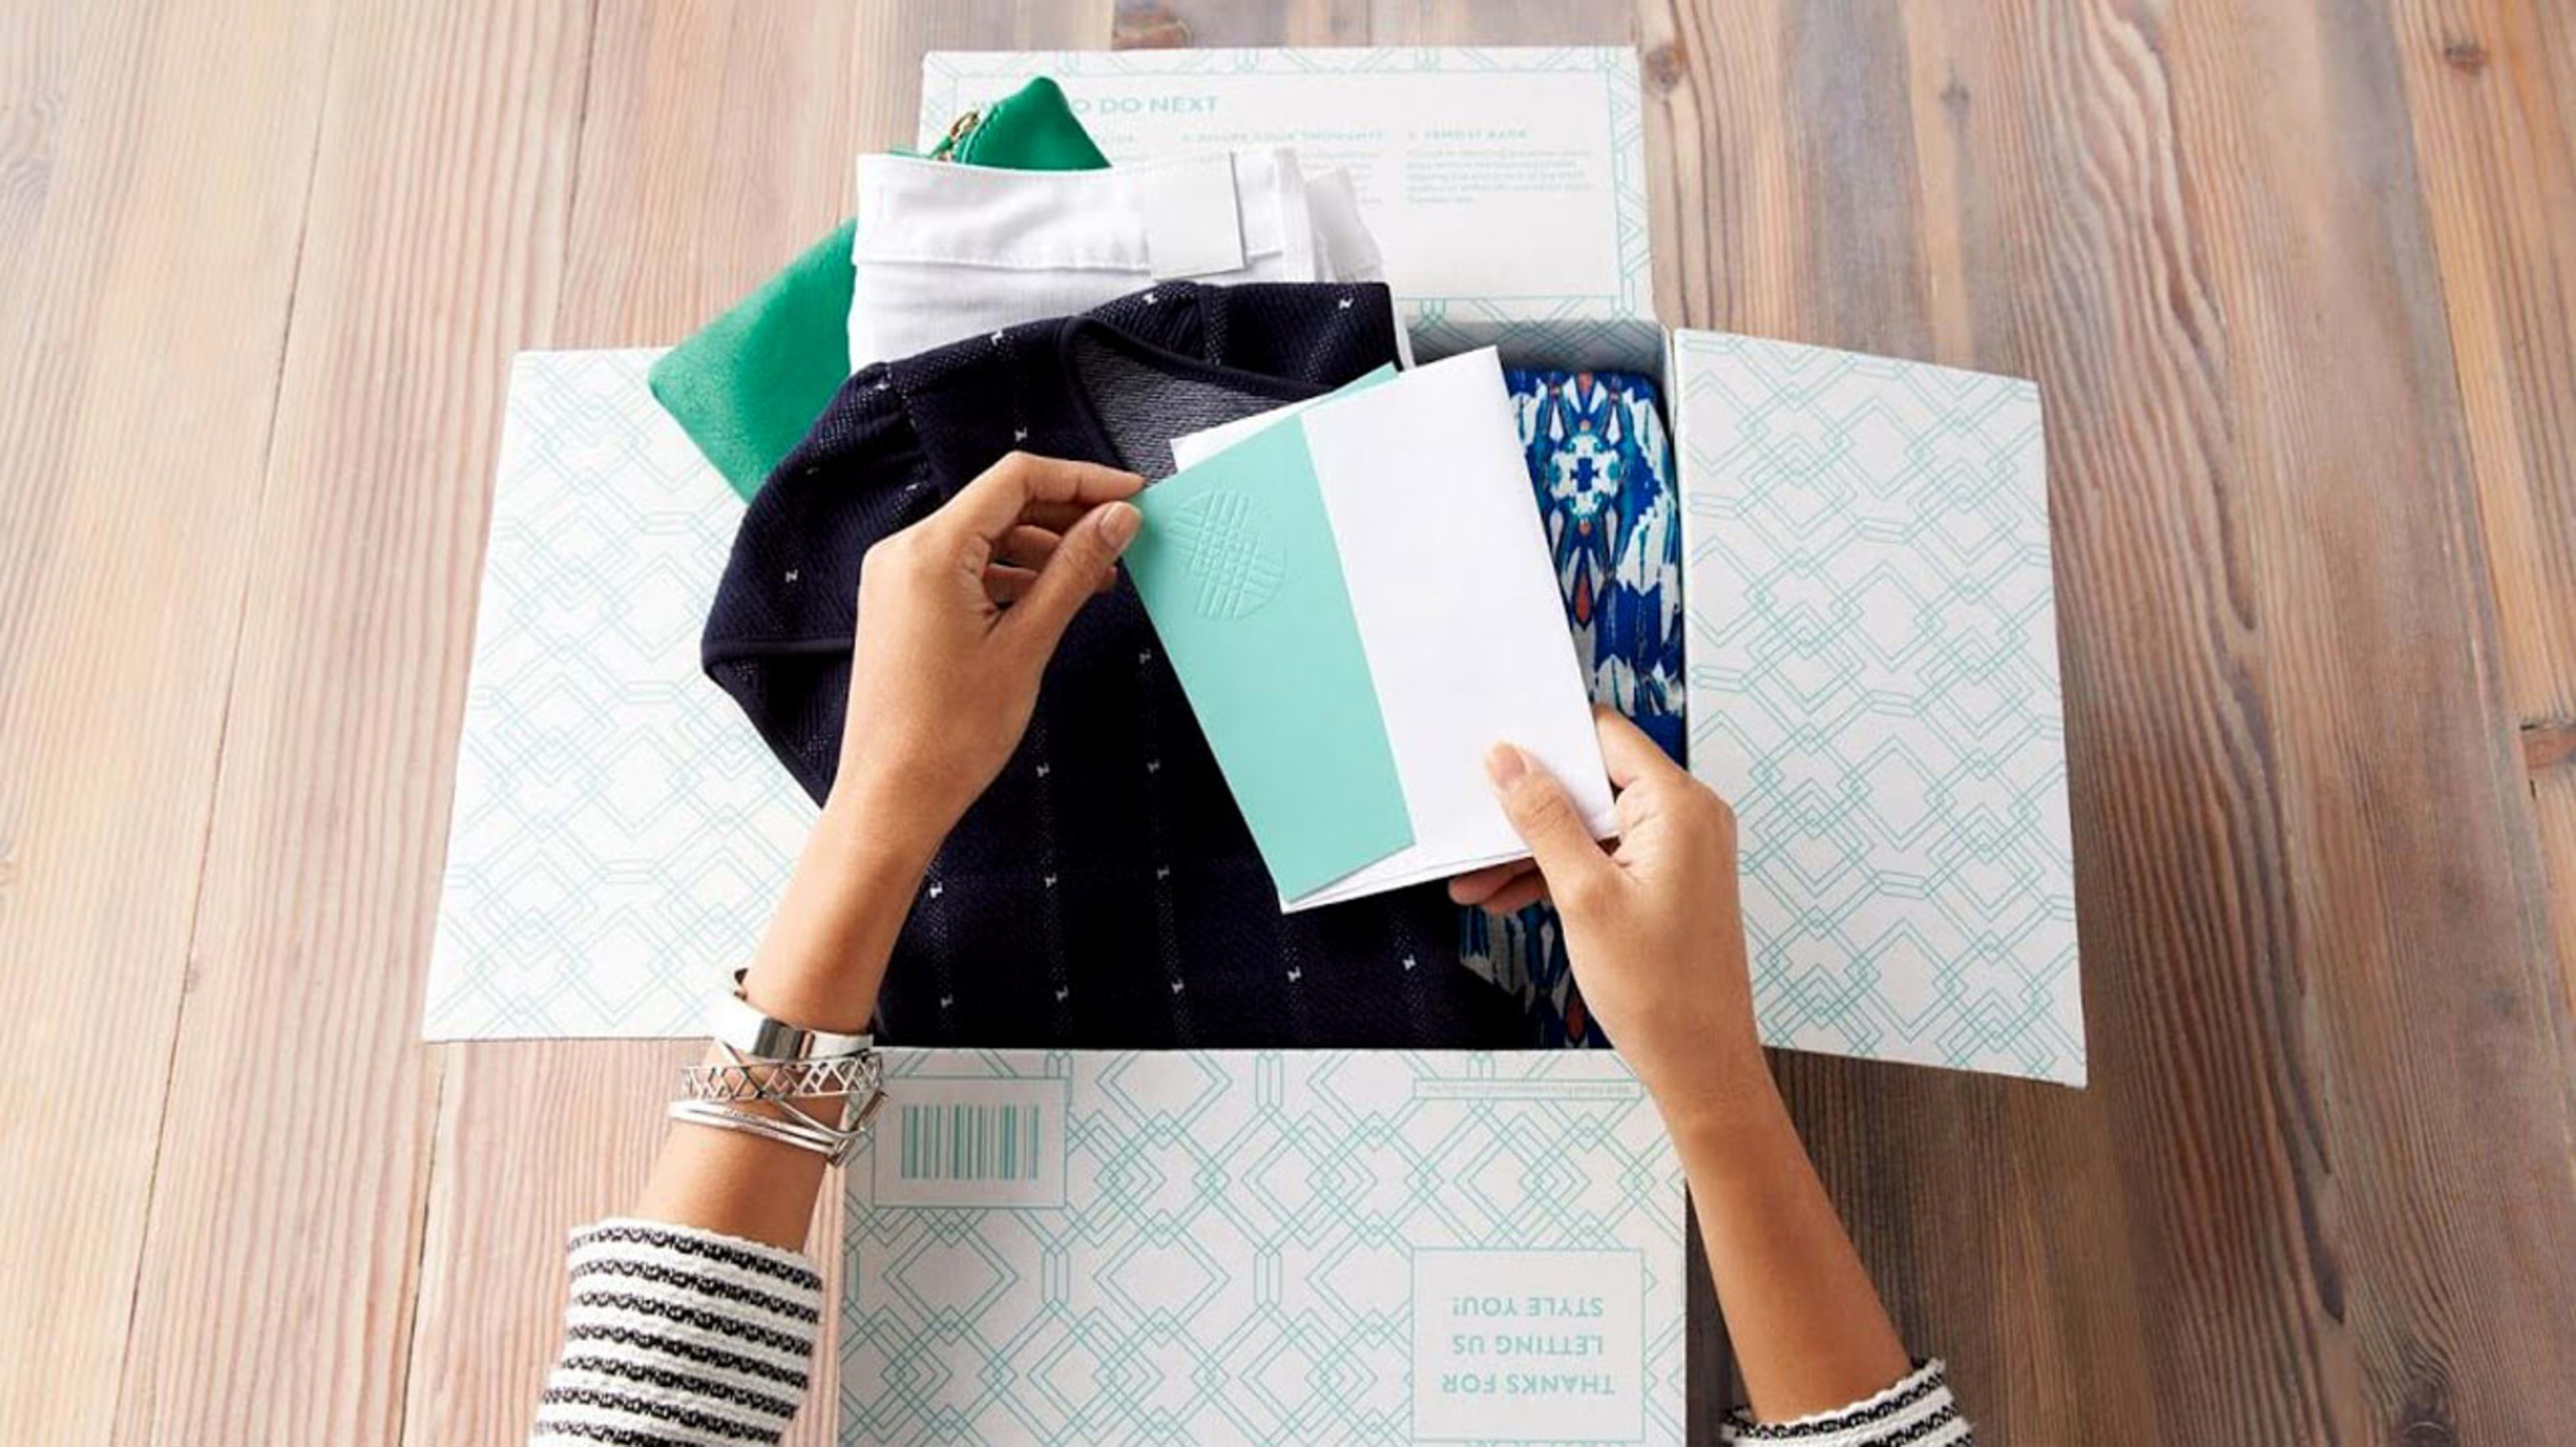 Welcome, SFIX! After a rare woman-led tech IPO, Stitch Fix is worth $1.5B